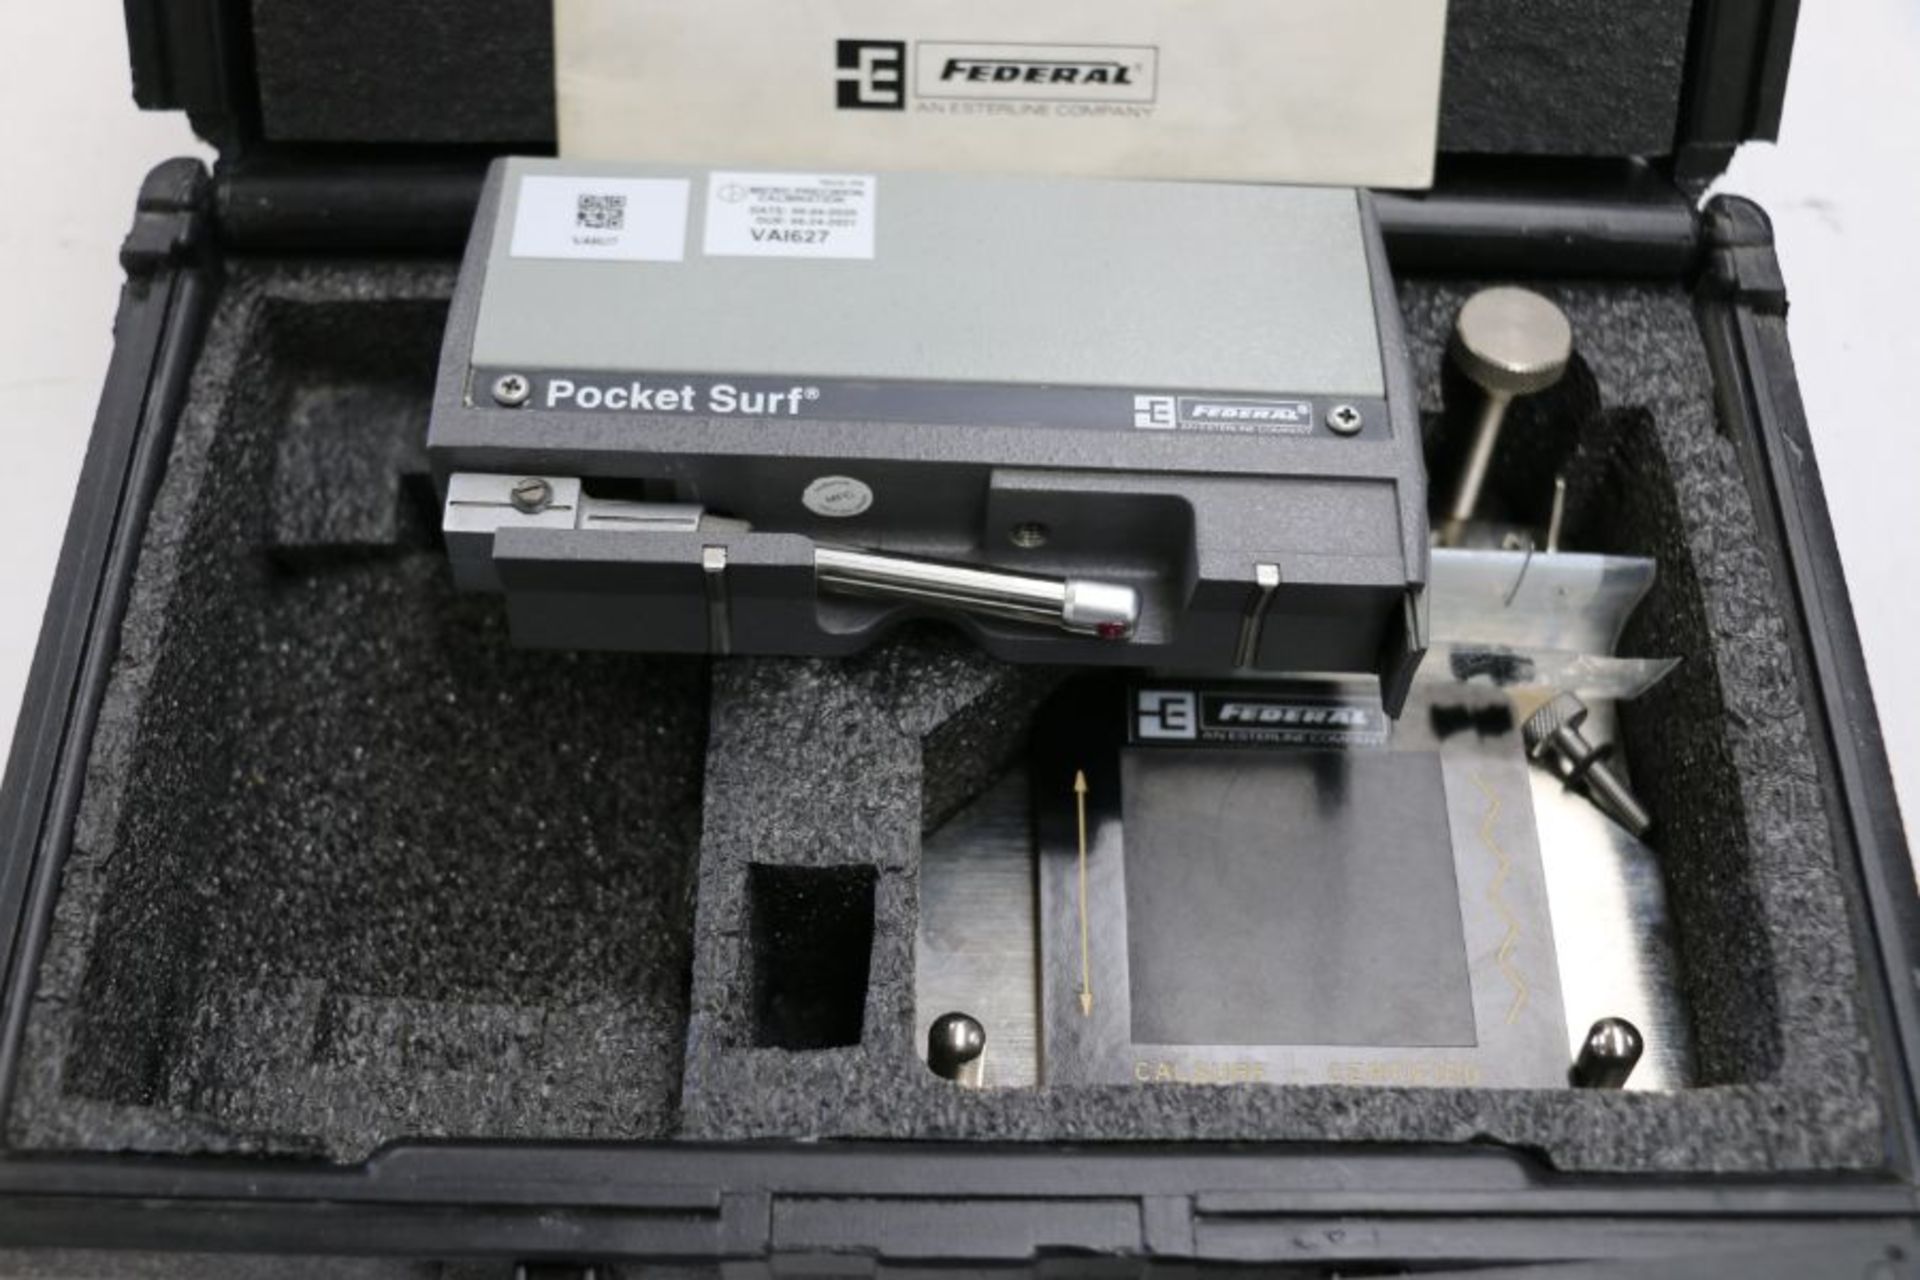 Federal Pocket Surf Portable Surface Roughness Gage - Image 3 of 4